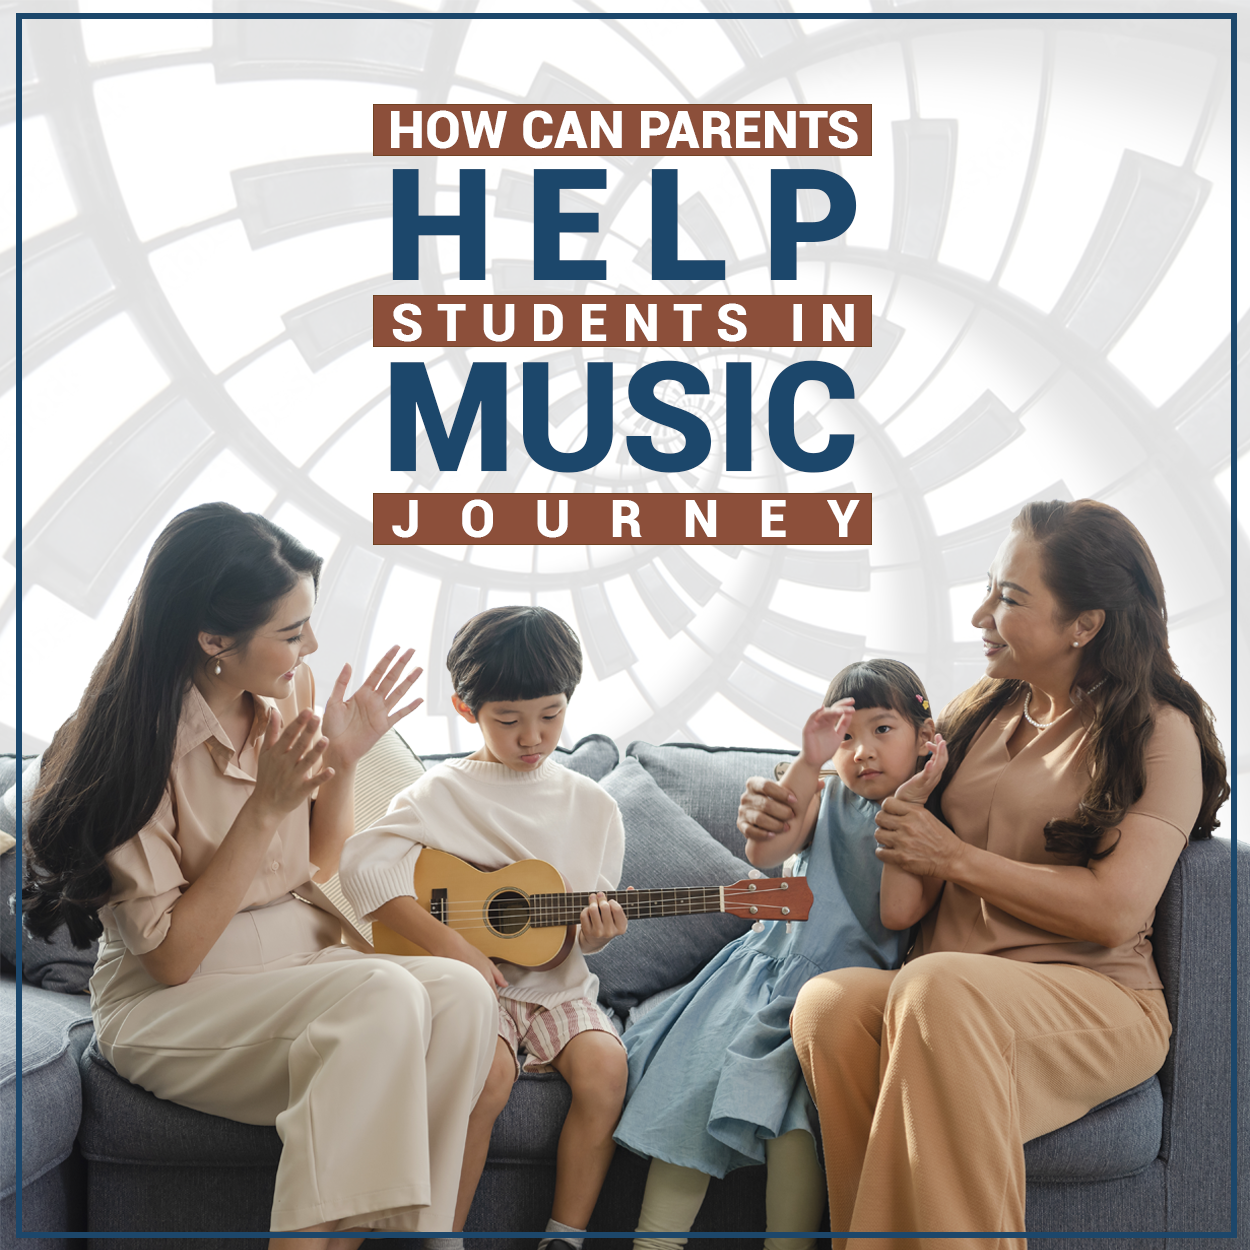 HOW CAN PARENTS HELP STUDENT IN MUSIC JOURNEY